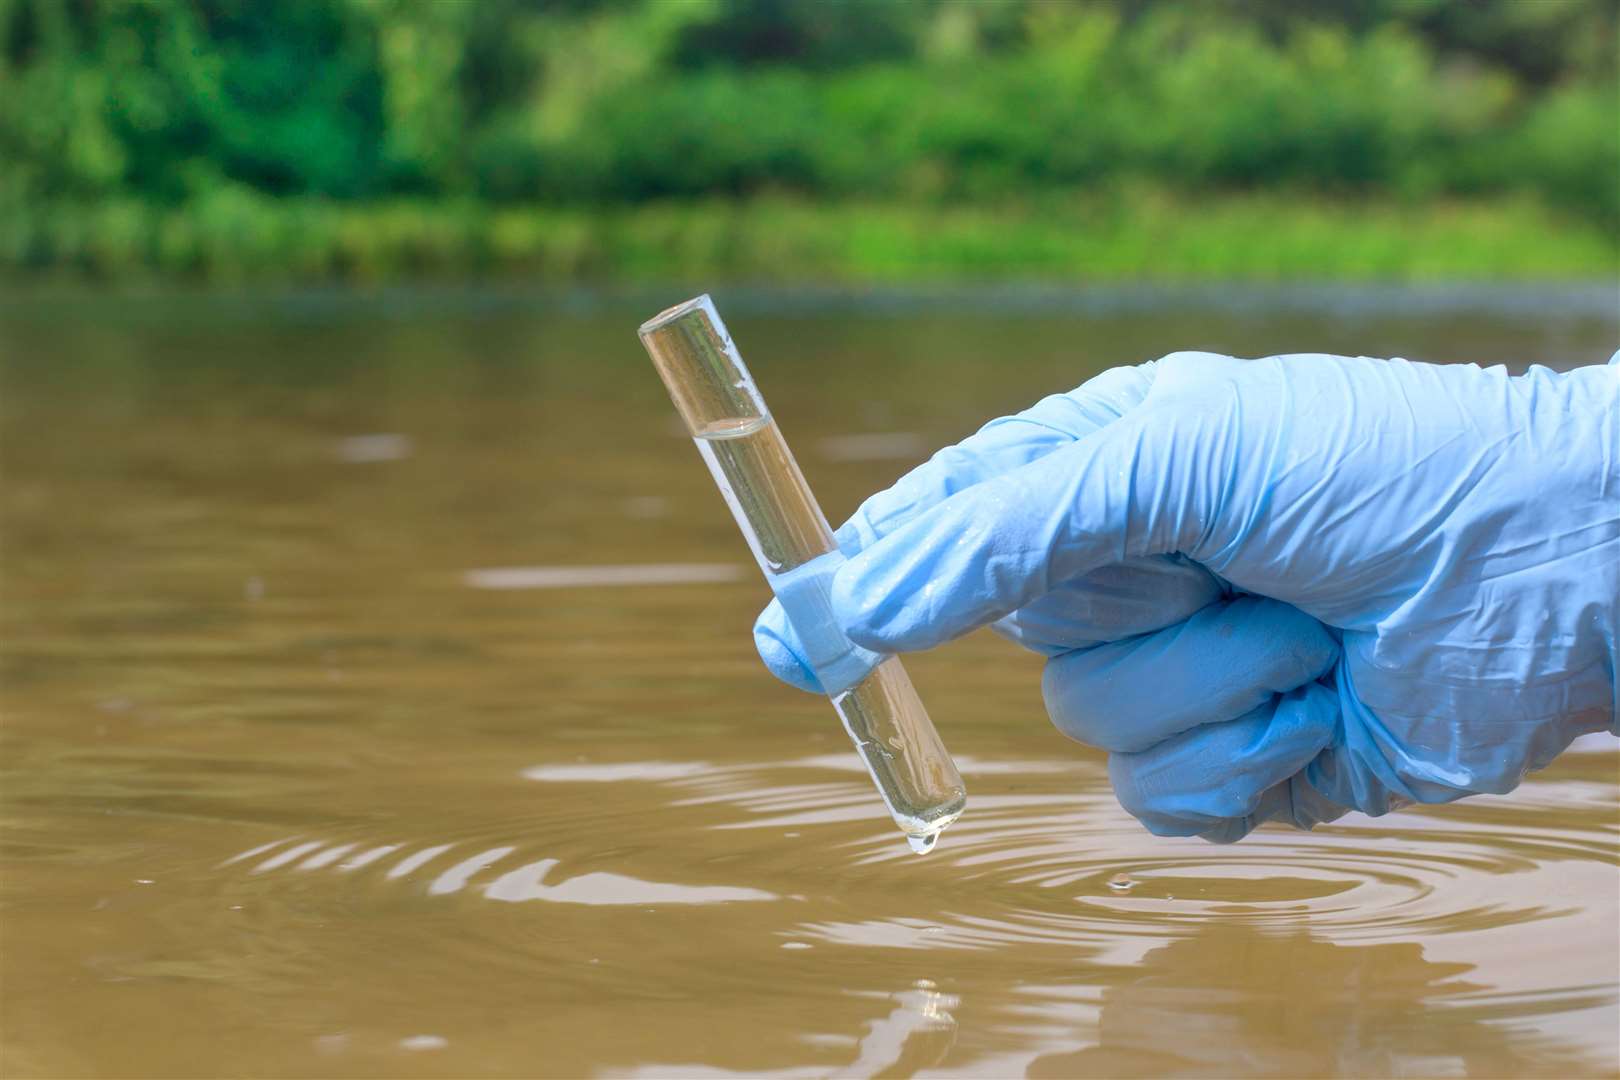 The study has found data on 60 medicines to be found in Scotland's water environment.